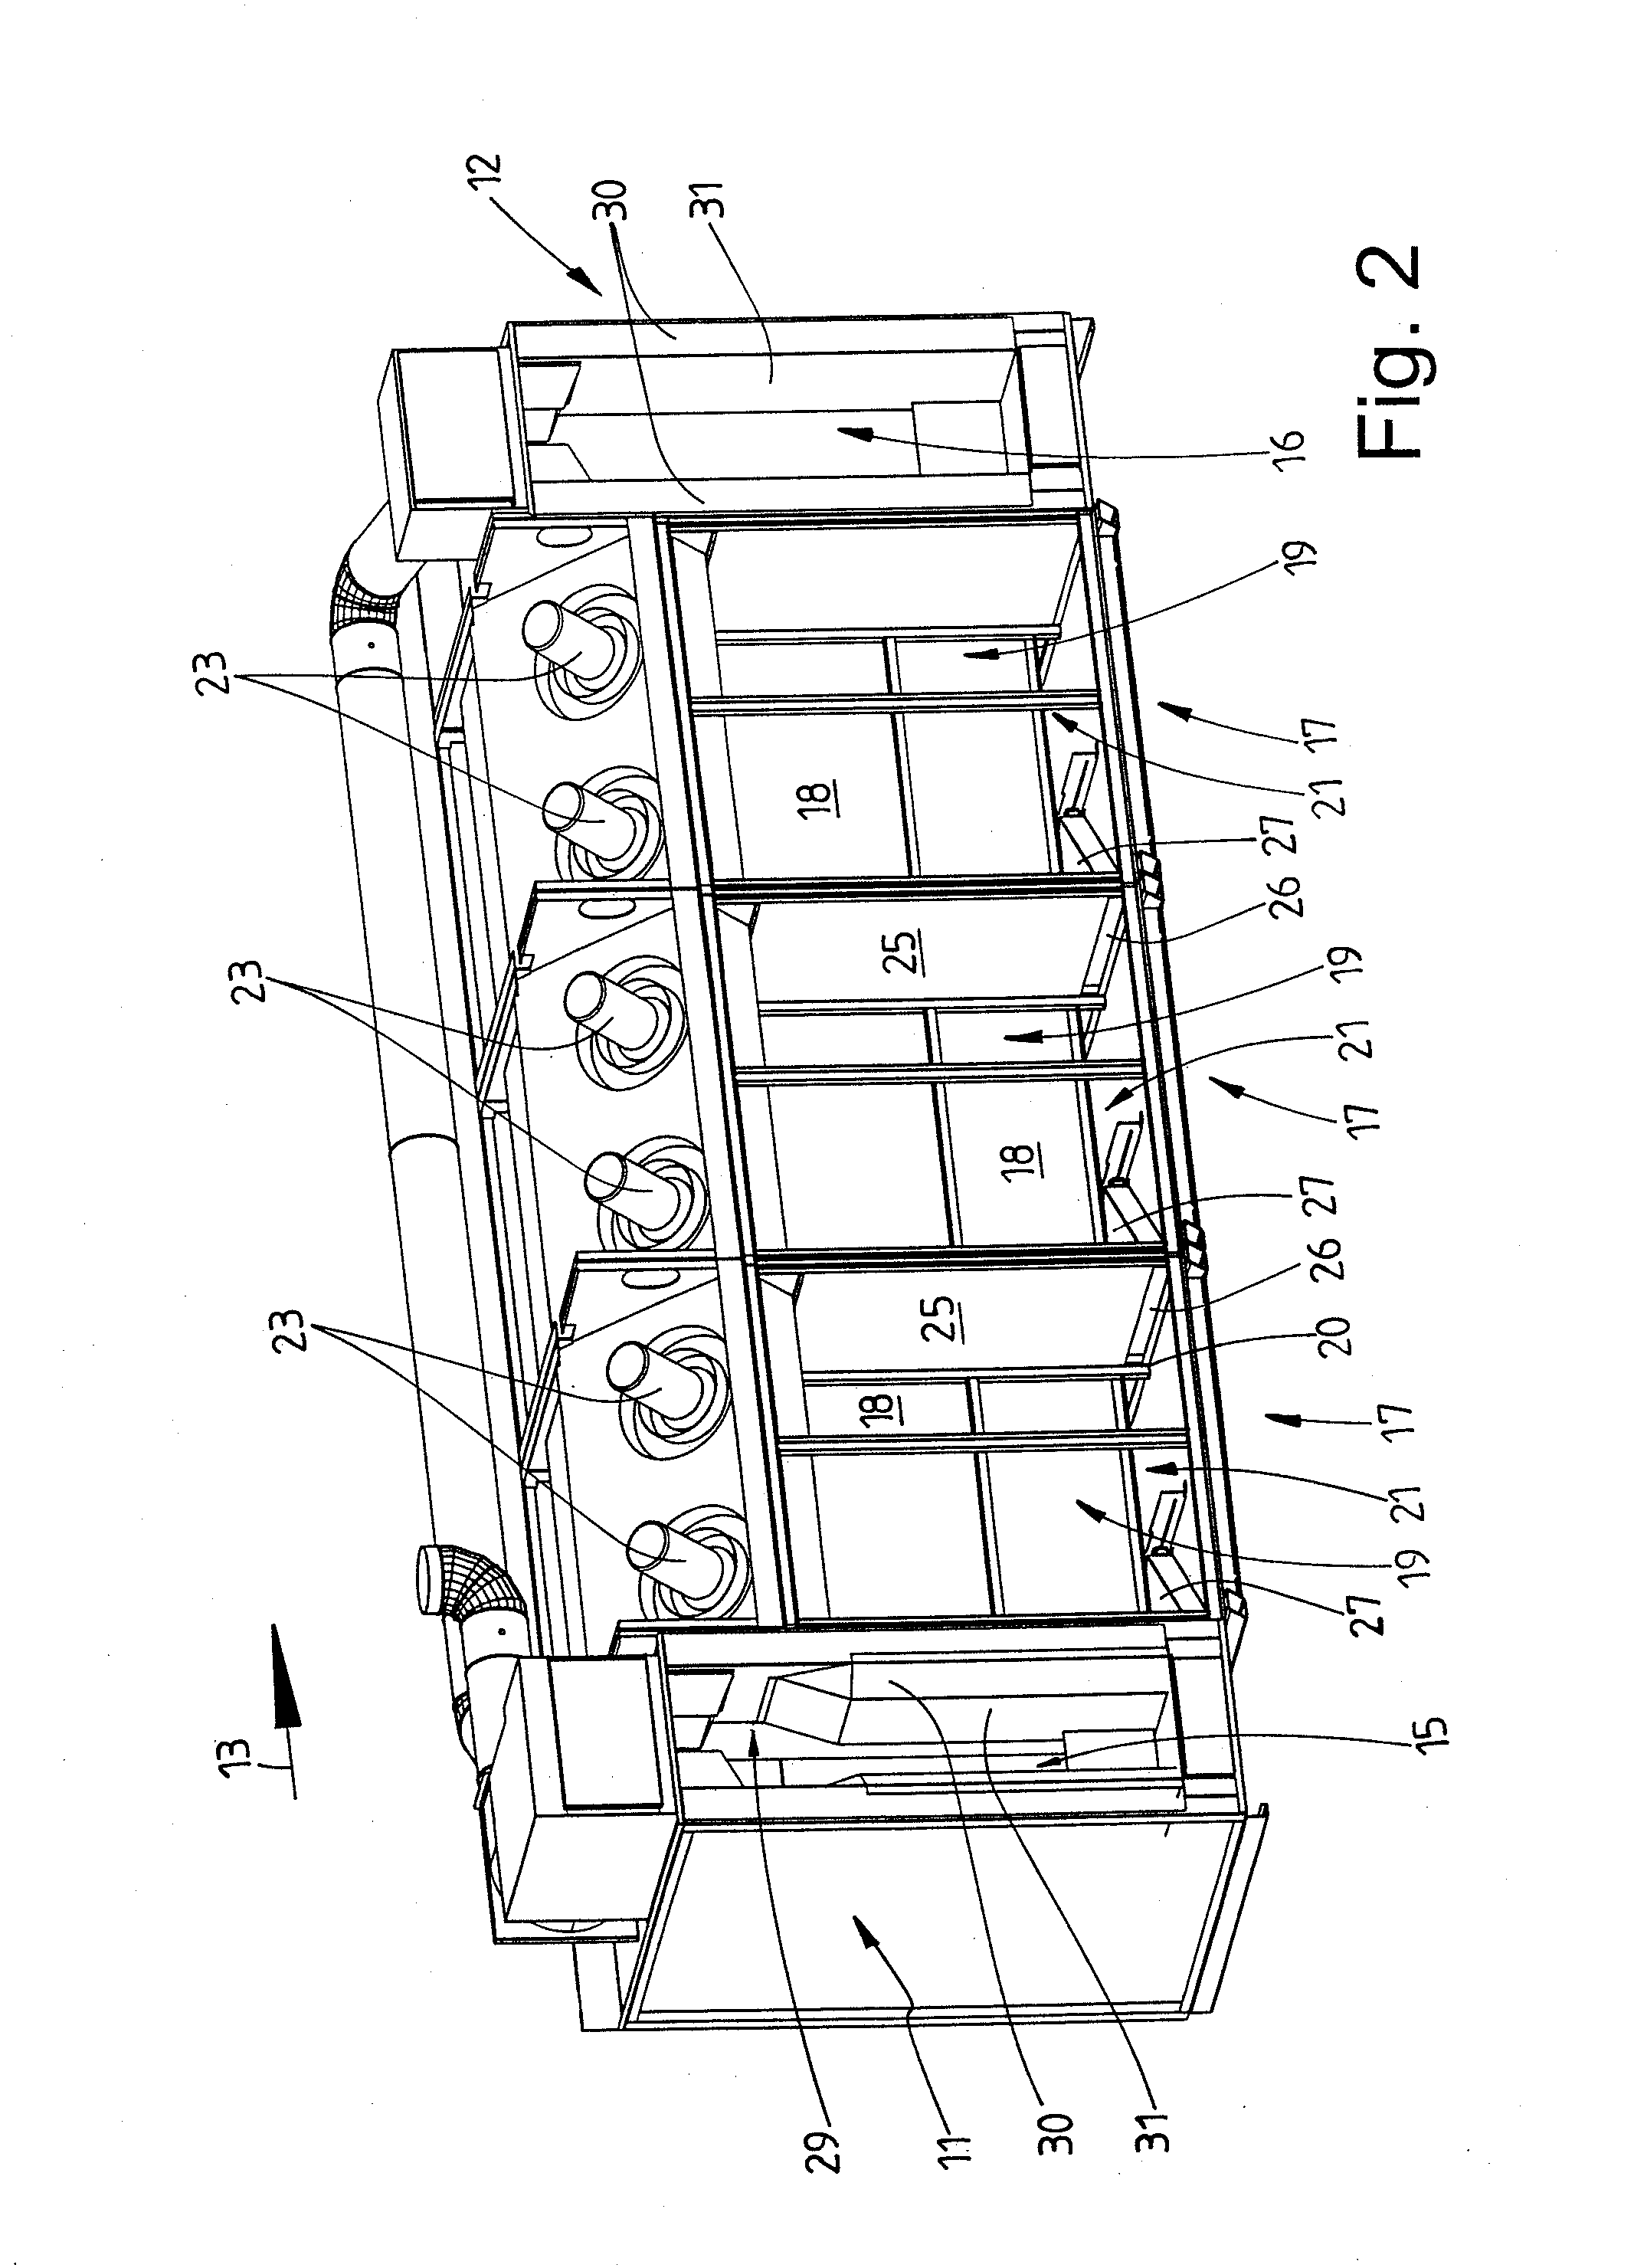 Method for smoothing articles of clothing, and tunnel finisher